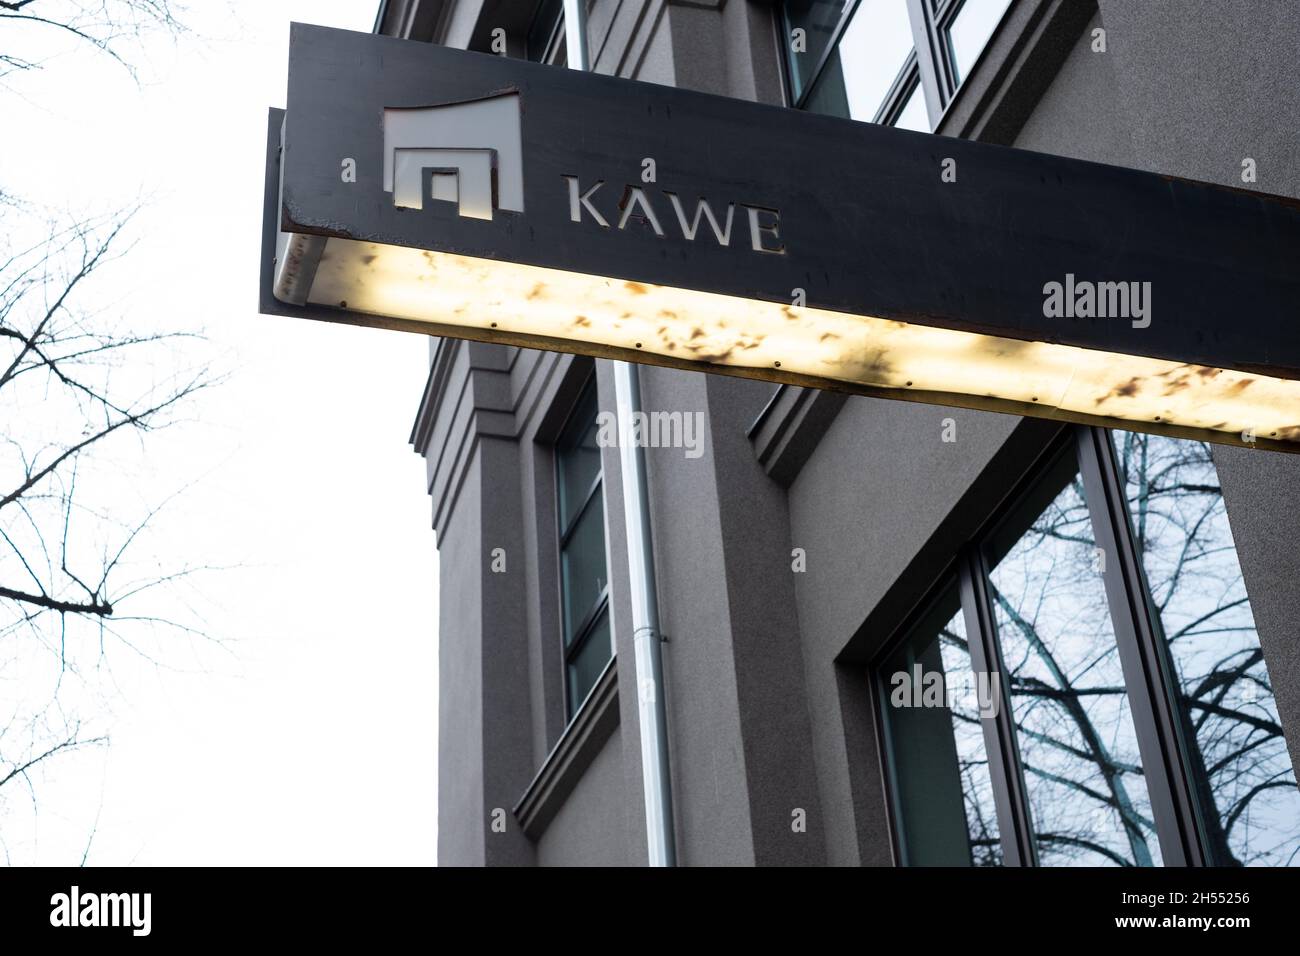 Kawe company logo on their office building. Kawe is dealing with commercial real estate management and development. Stock Photo